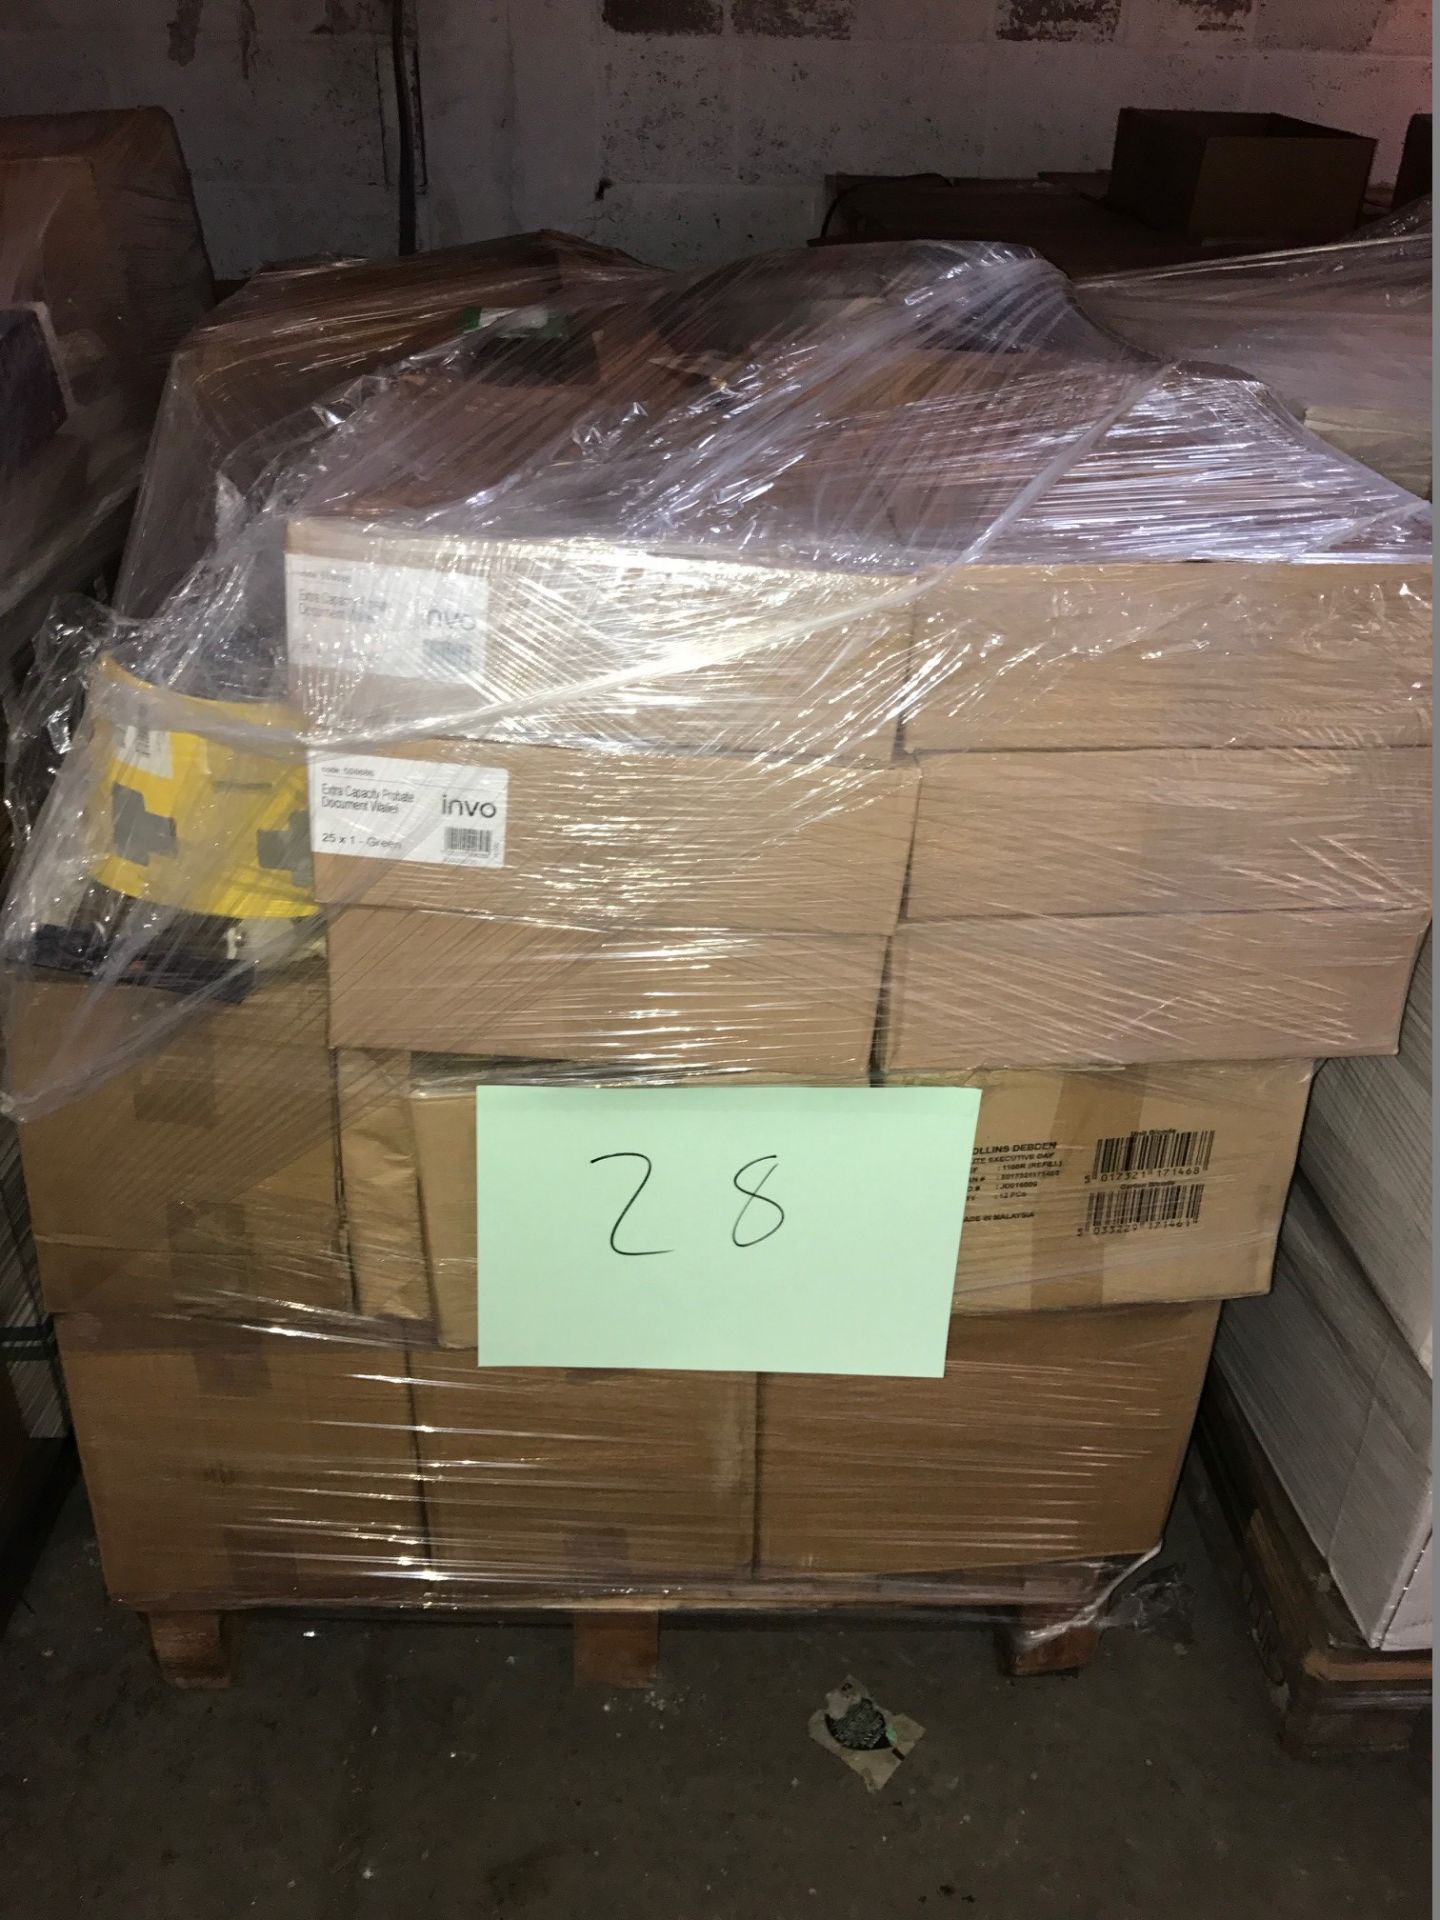 1 x Pallet of Mixed Stock/Stationery Including Invo Products, Bike Accessories, Remarkable